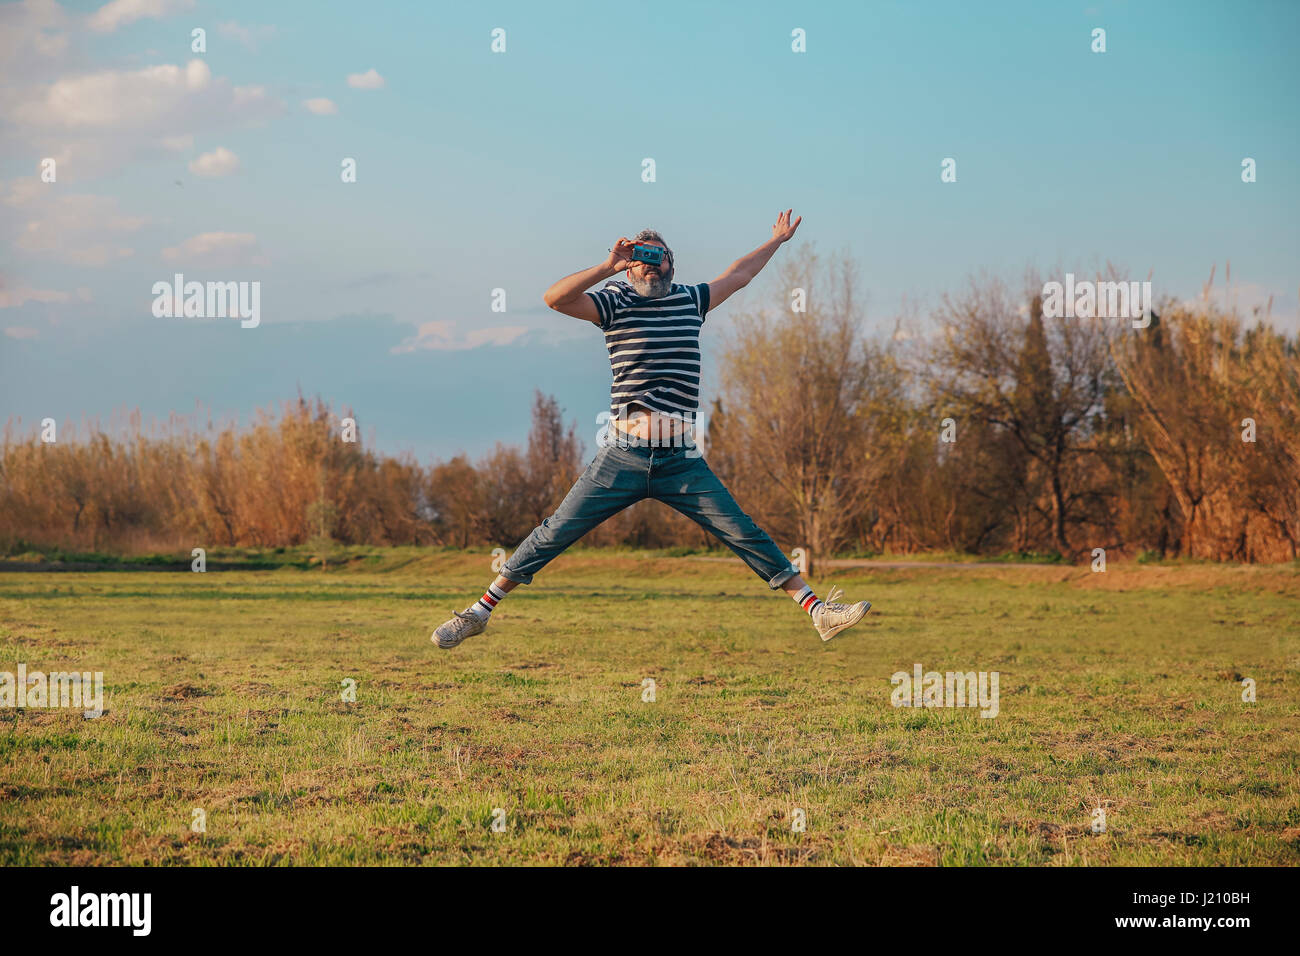 Man jumping in the air while taking photo with vintage camera Stock Photo